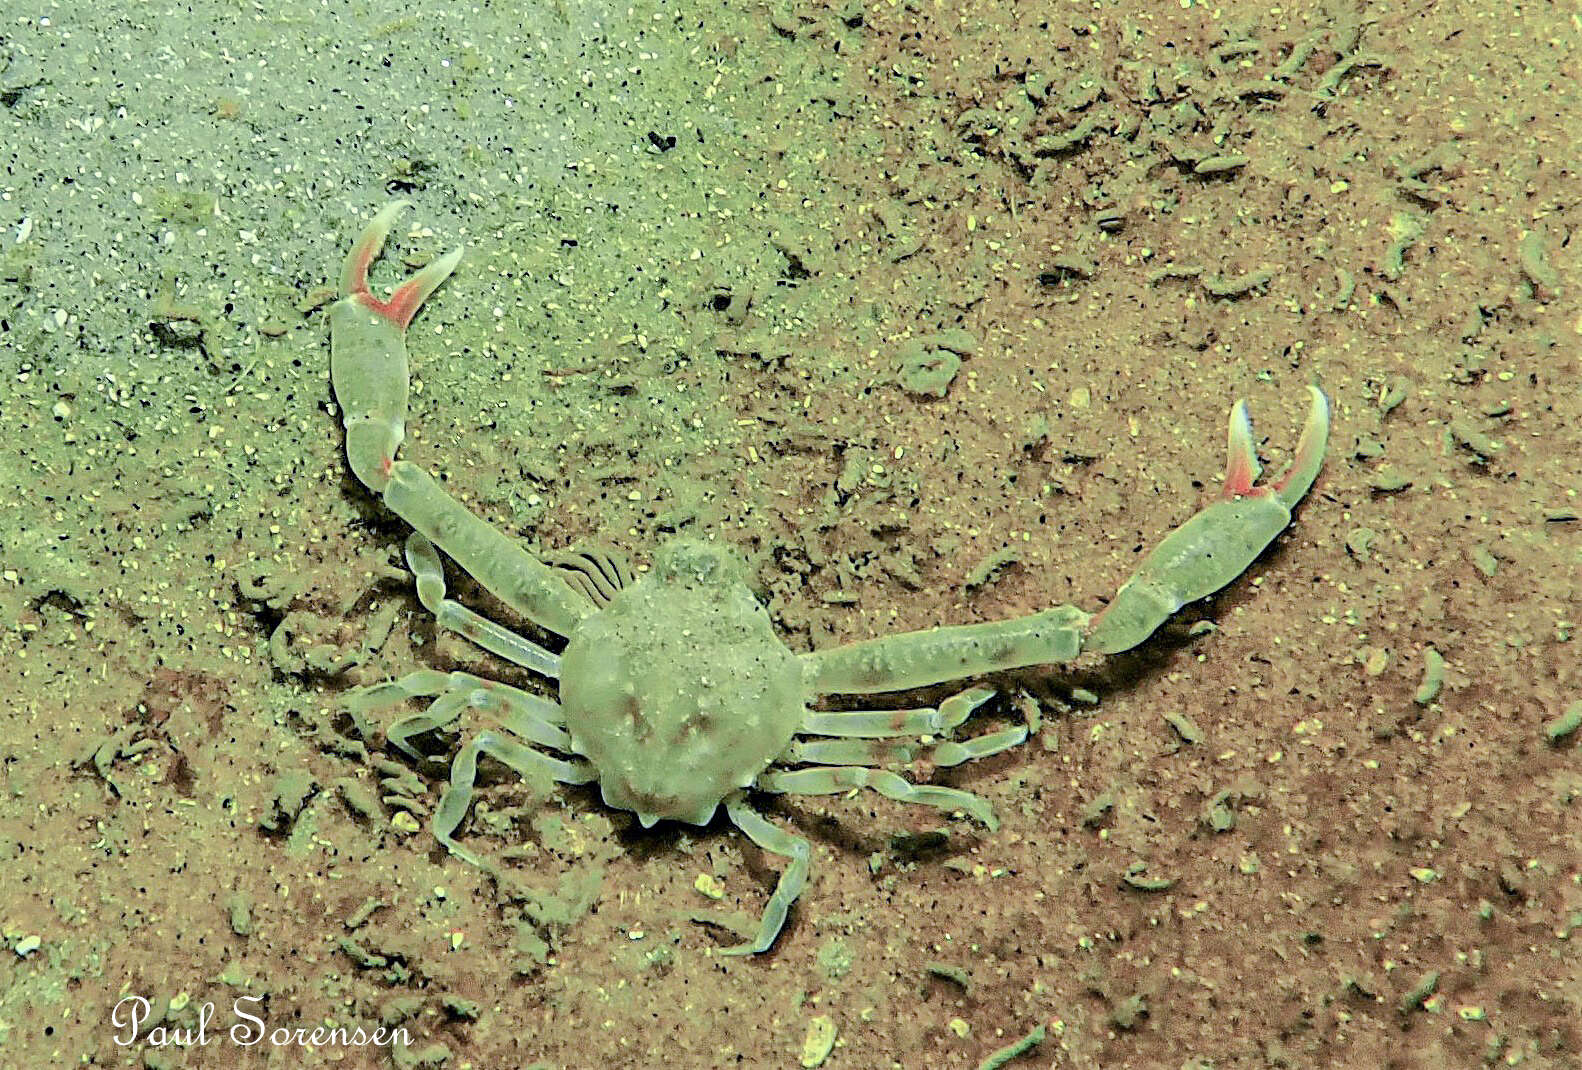 Image of smooth nut crab